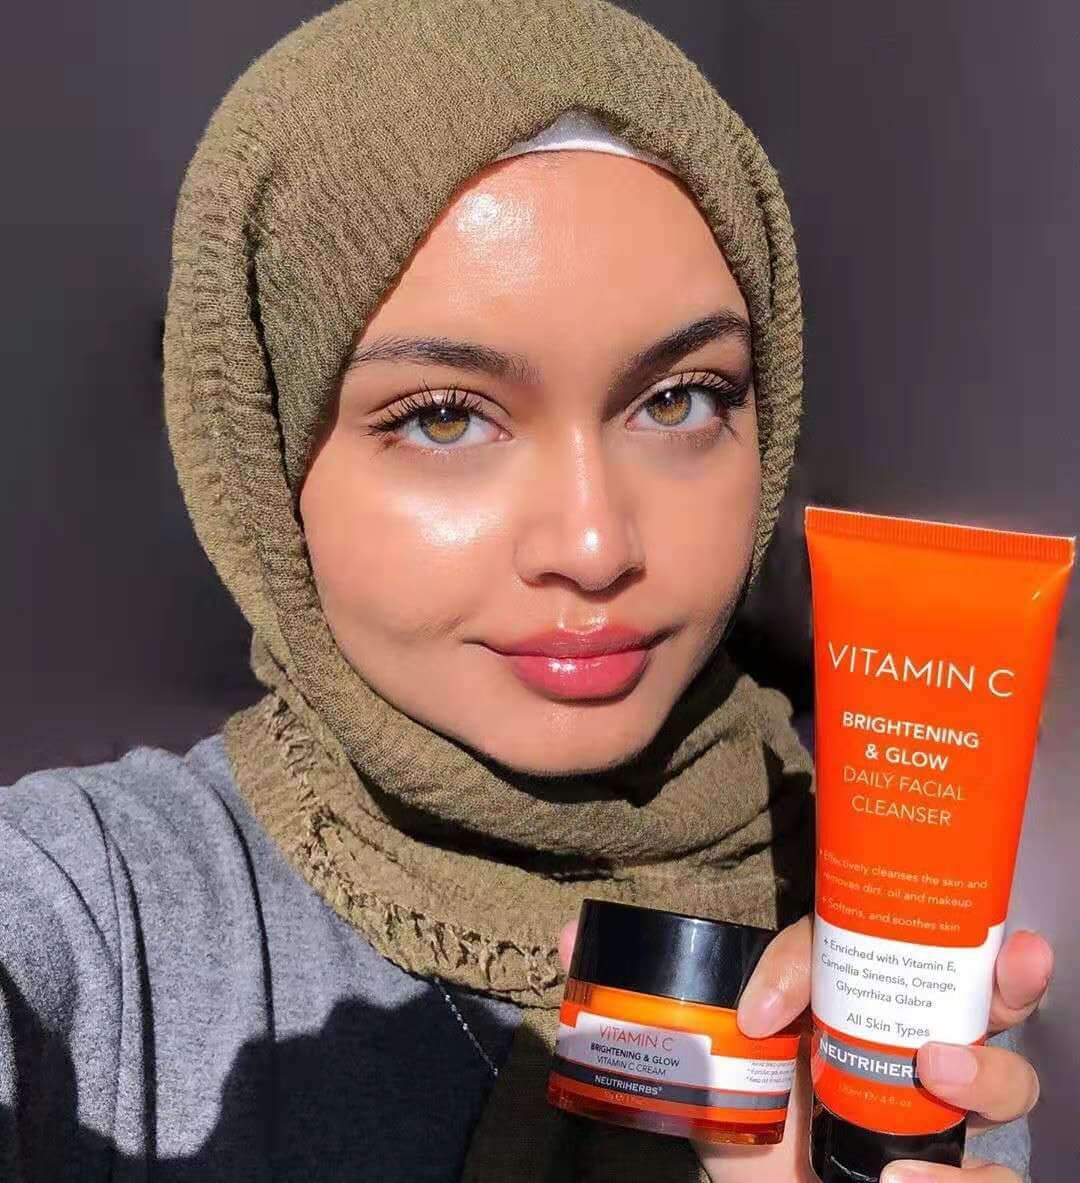 Neutriherbs vitamin c skincare routine for dull, tired & irritated skin-Instagram influencers recommend 